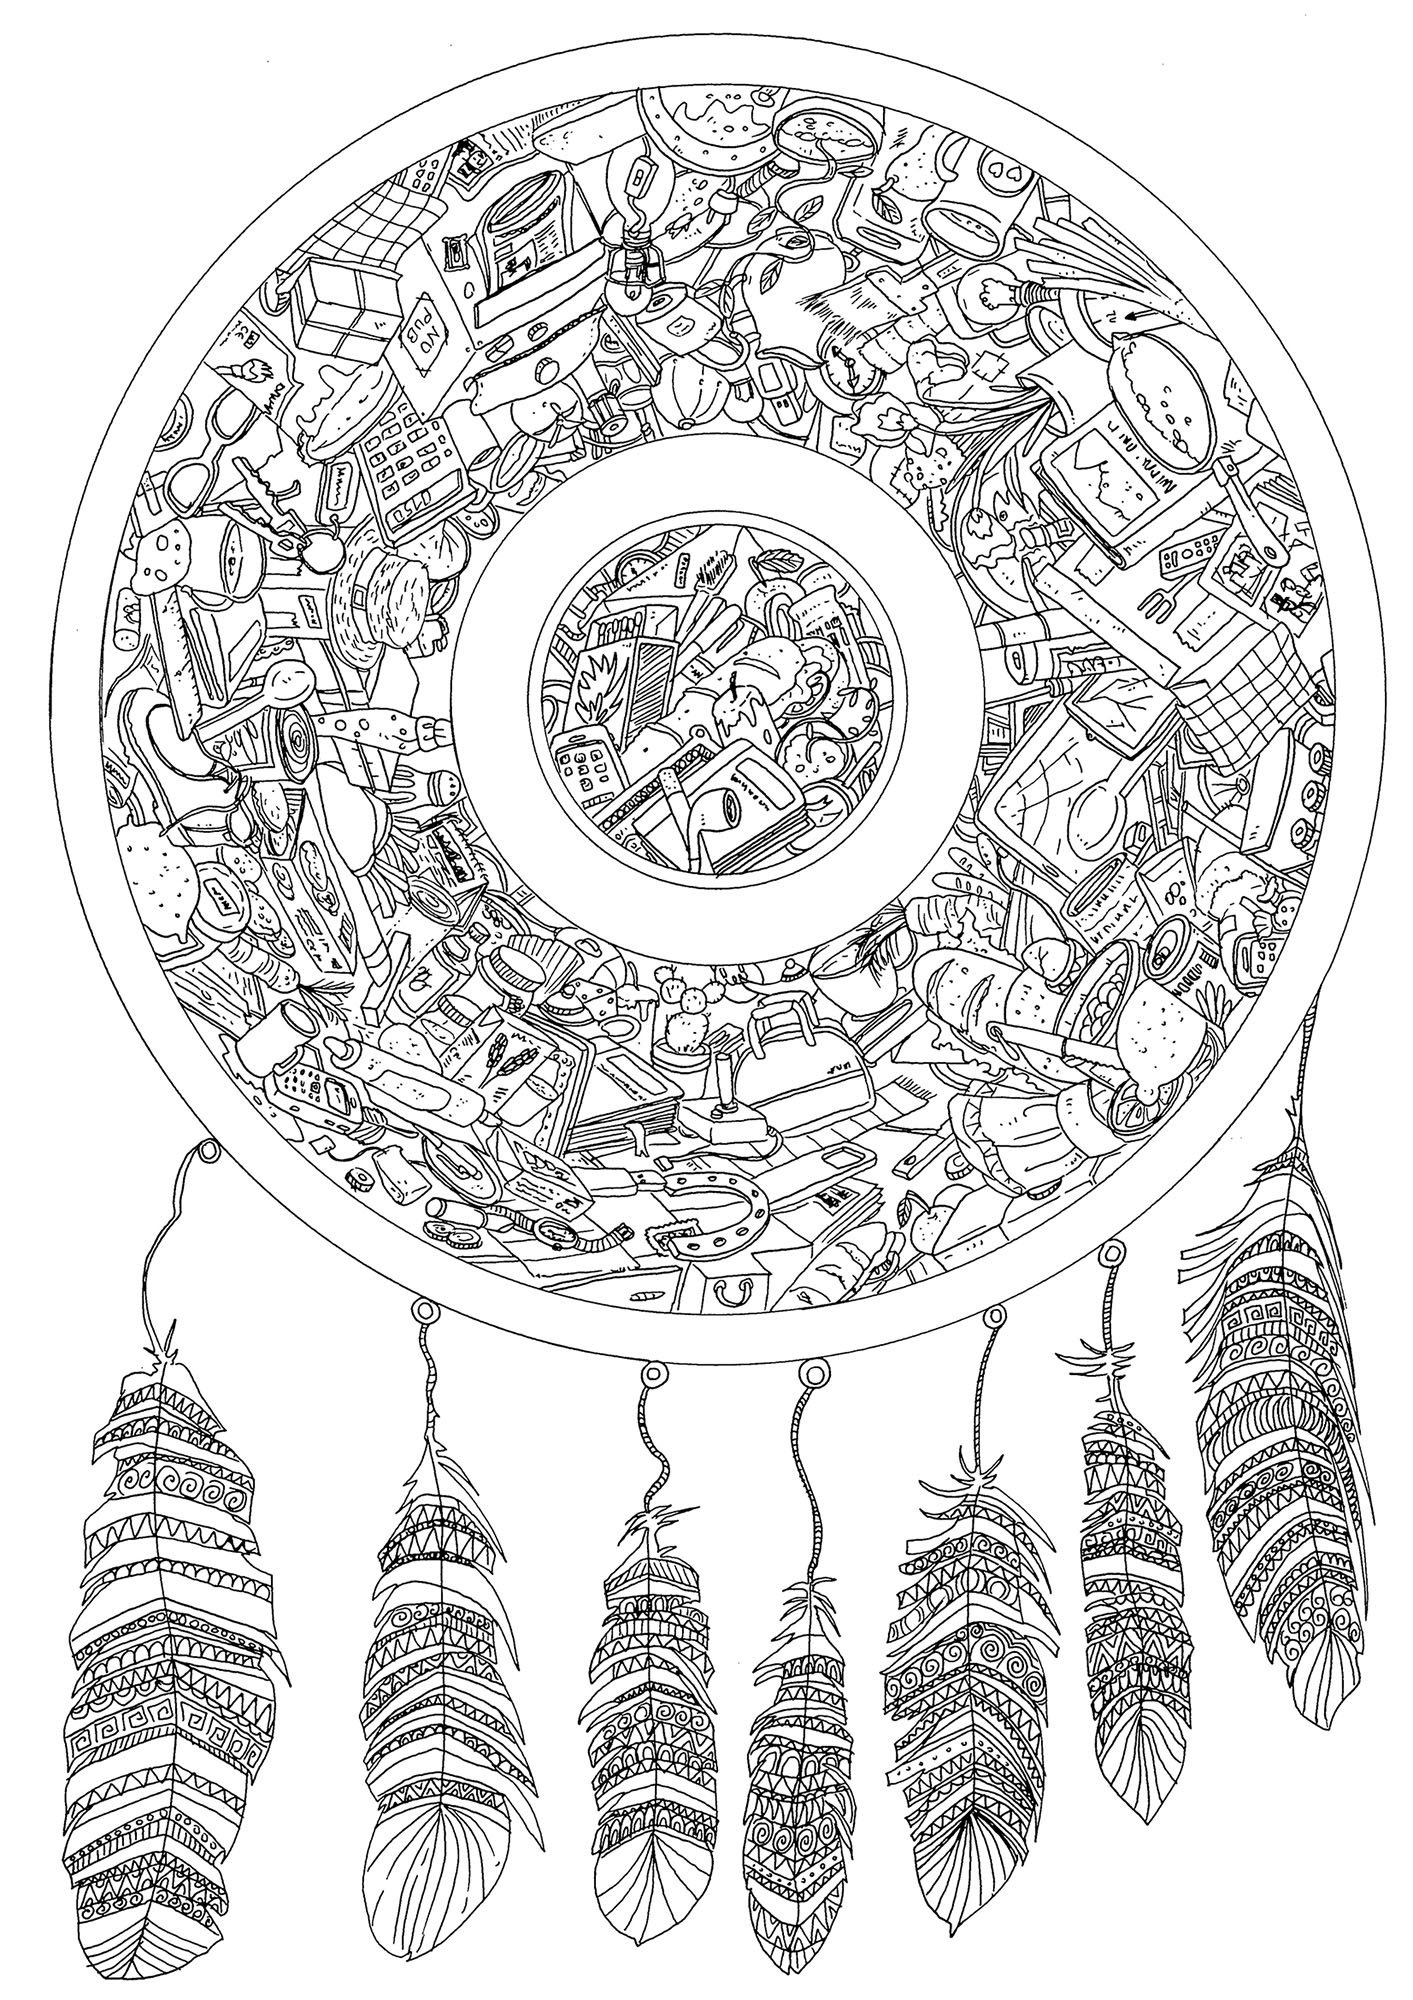 Dream catcher and hidden objects. Color this dream catcher, hiding lots of intricately drawn details, Artist : Frédéric Brogard